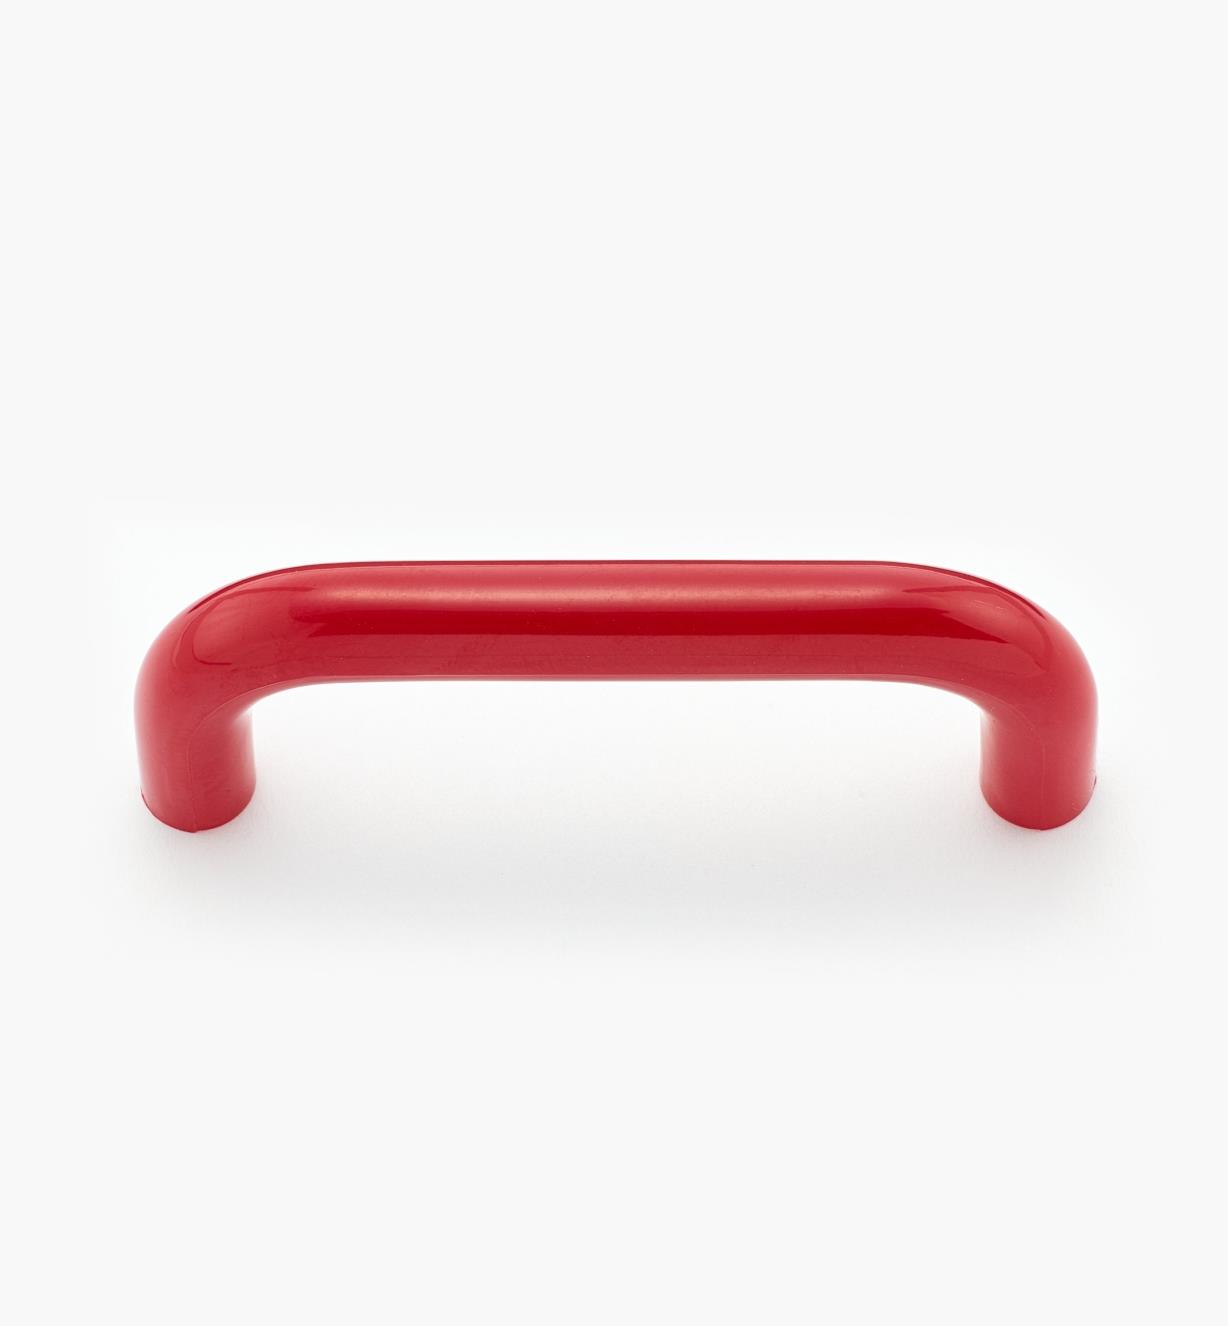 00W3911 - 2 7/8" Red Wire Pull